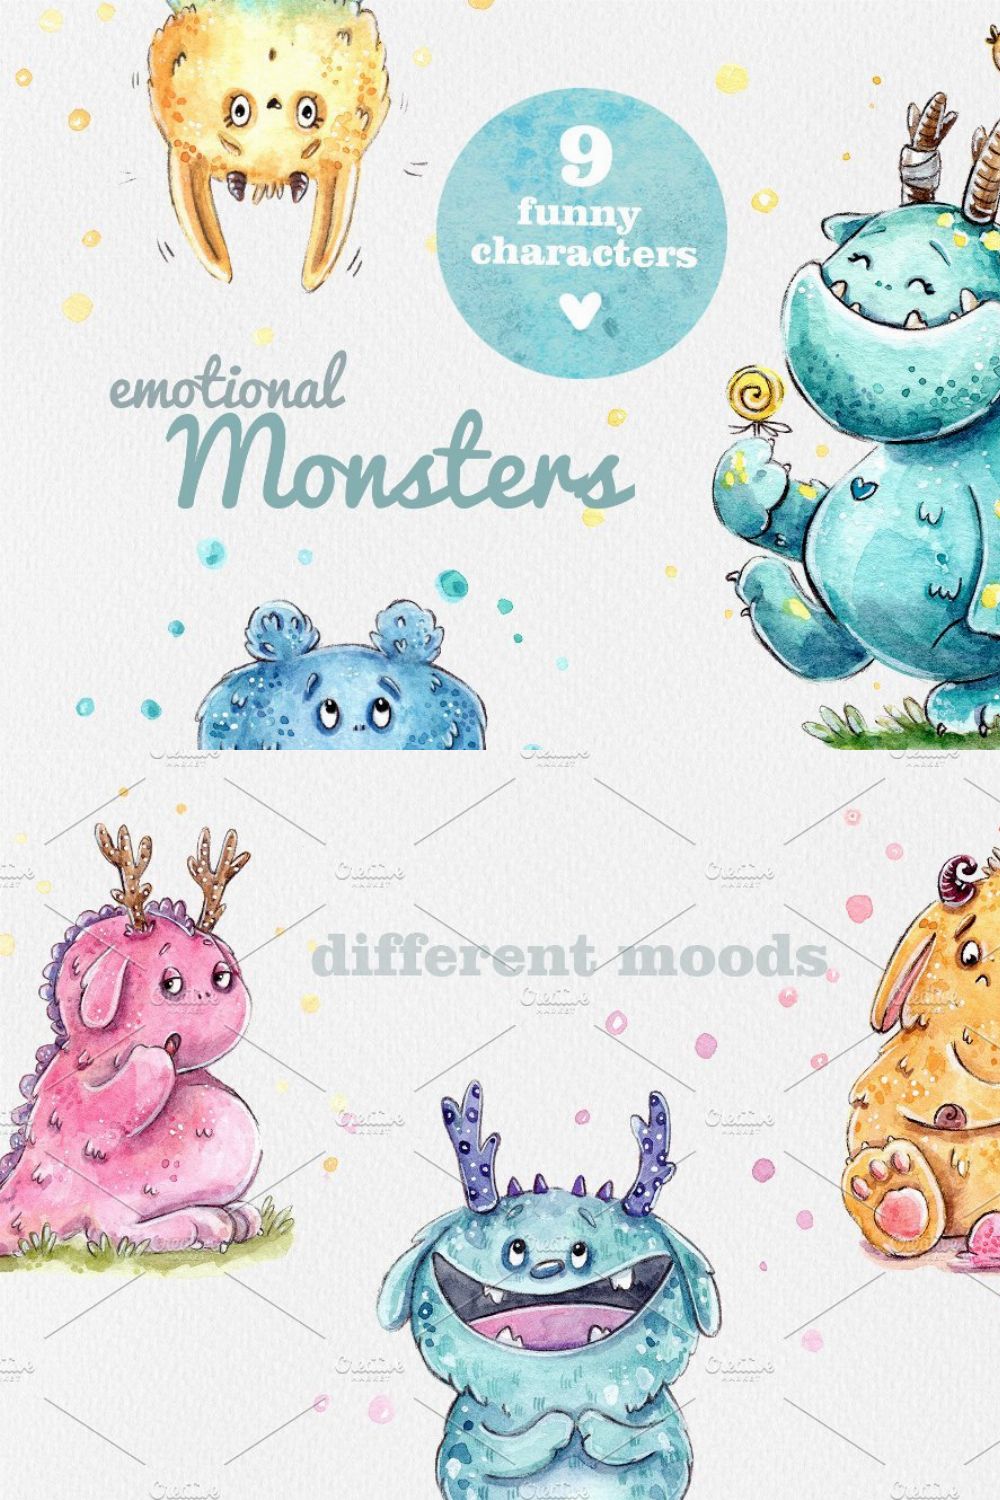 Emotional Monsters - 9 characters pinterest preview image.